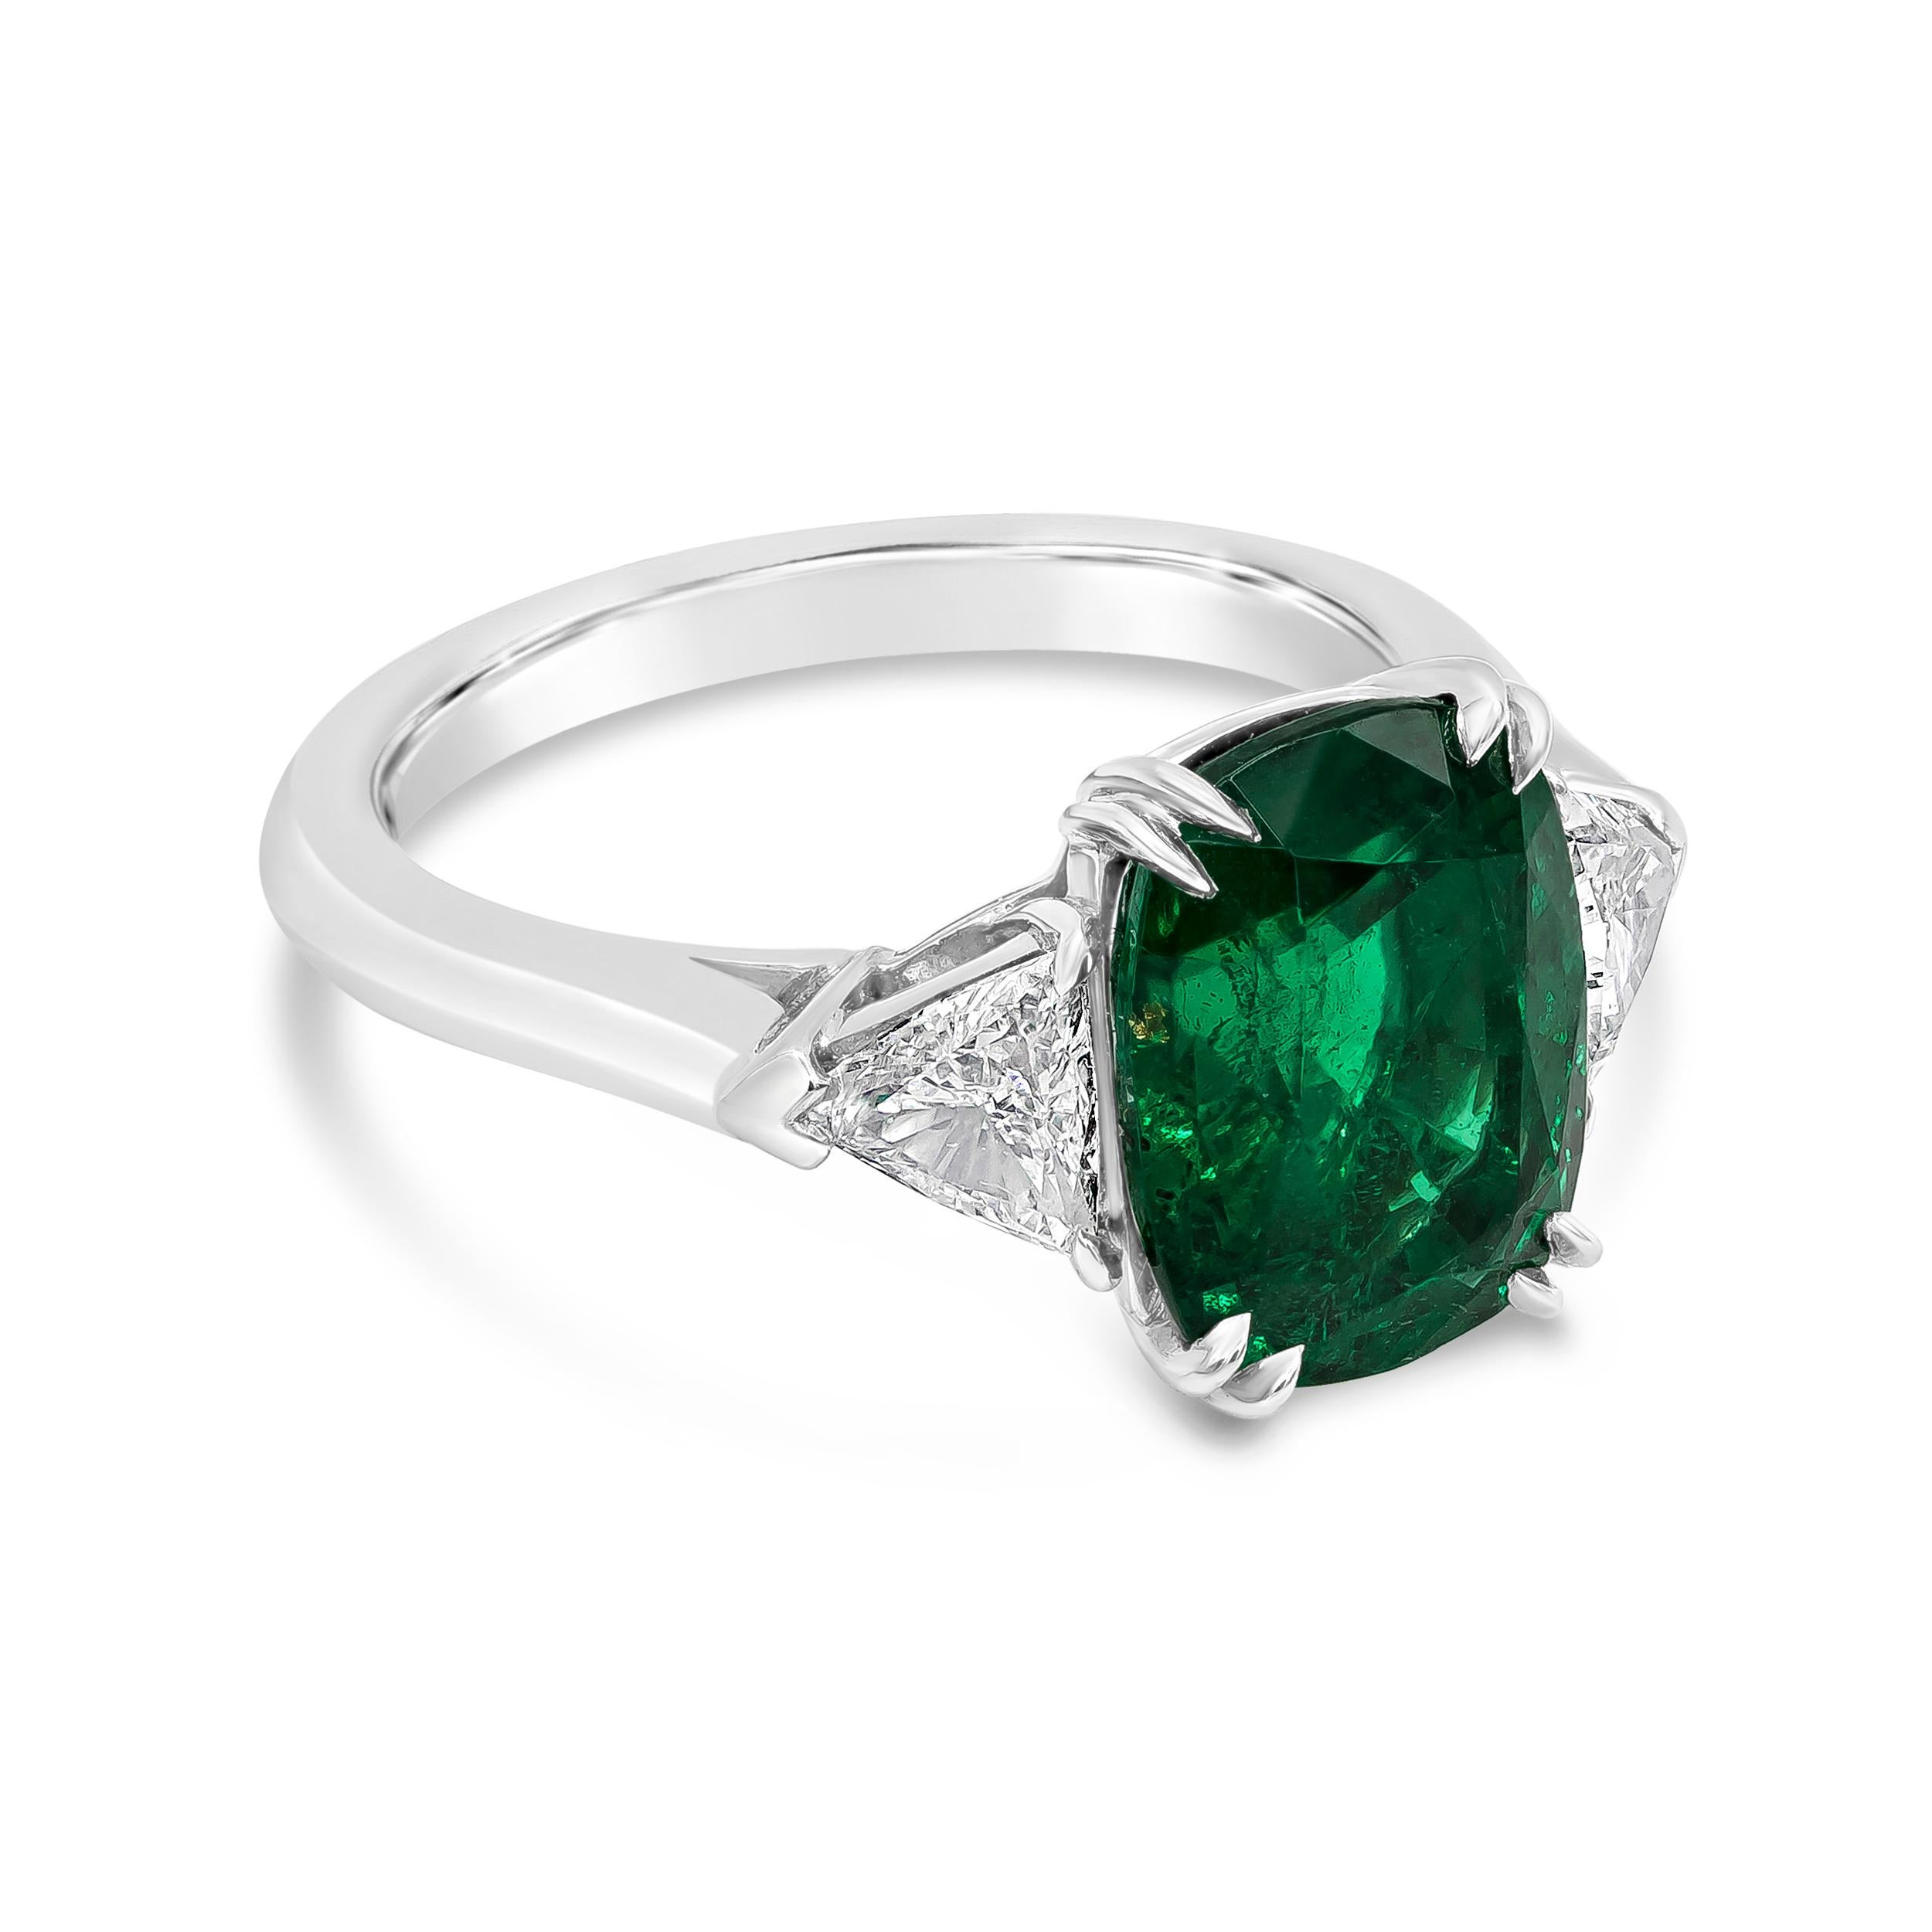 An engagement ring rich in color. Features a GIA certified 3.76 carat Cushion cut green emerald , set in eight prong platinum basket. Flanked by trillion diamonds on each side weighing 0.6 carat total.

Style available in different price ranges.